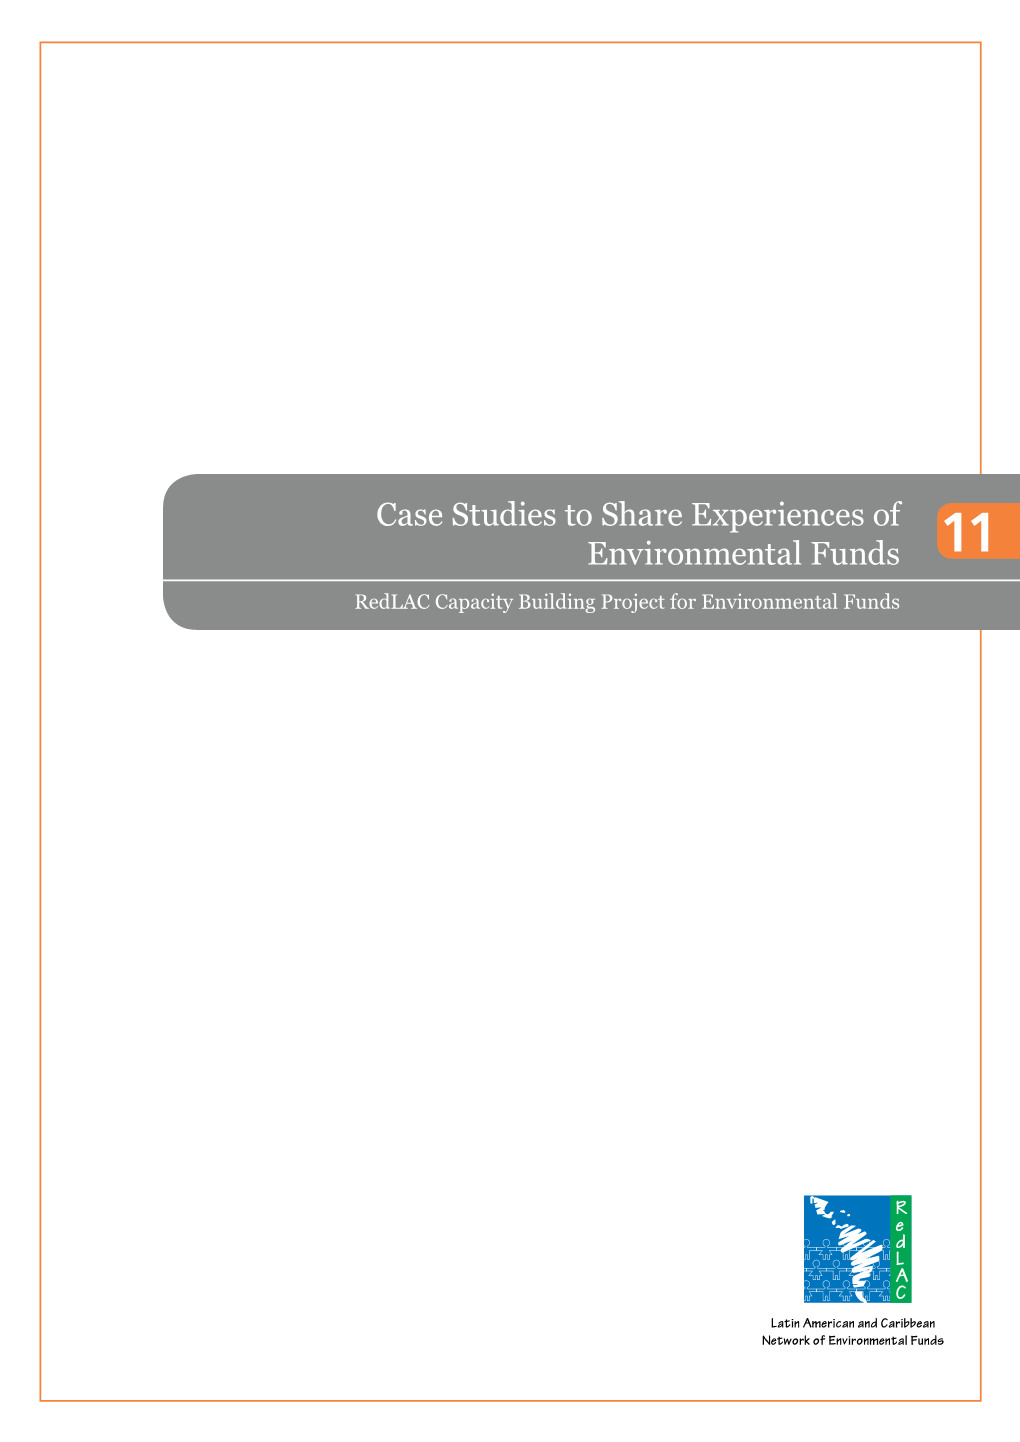 Case Studies to Share Experiences of Environmental Funds